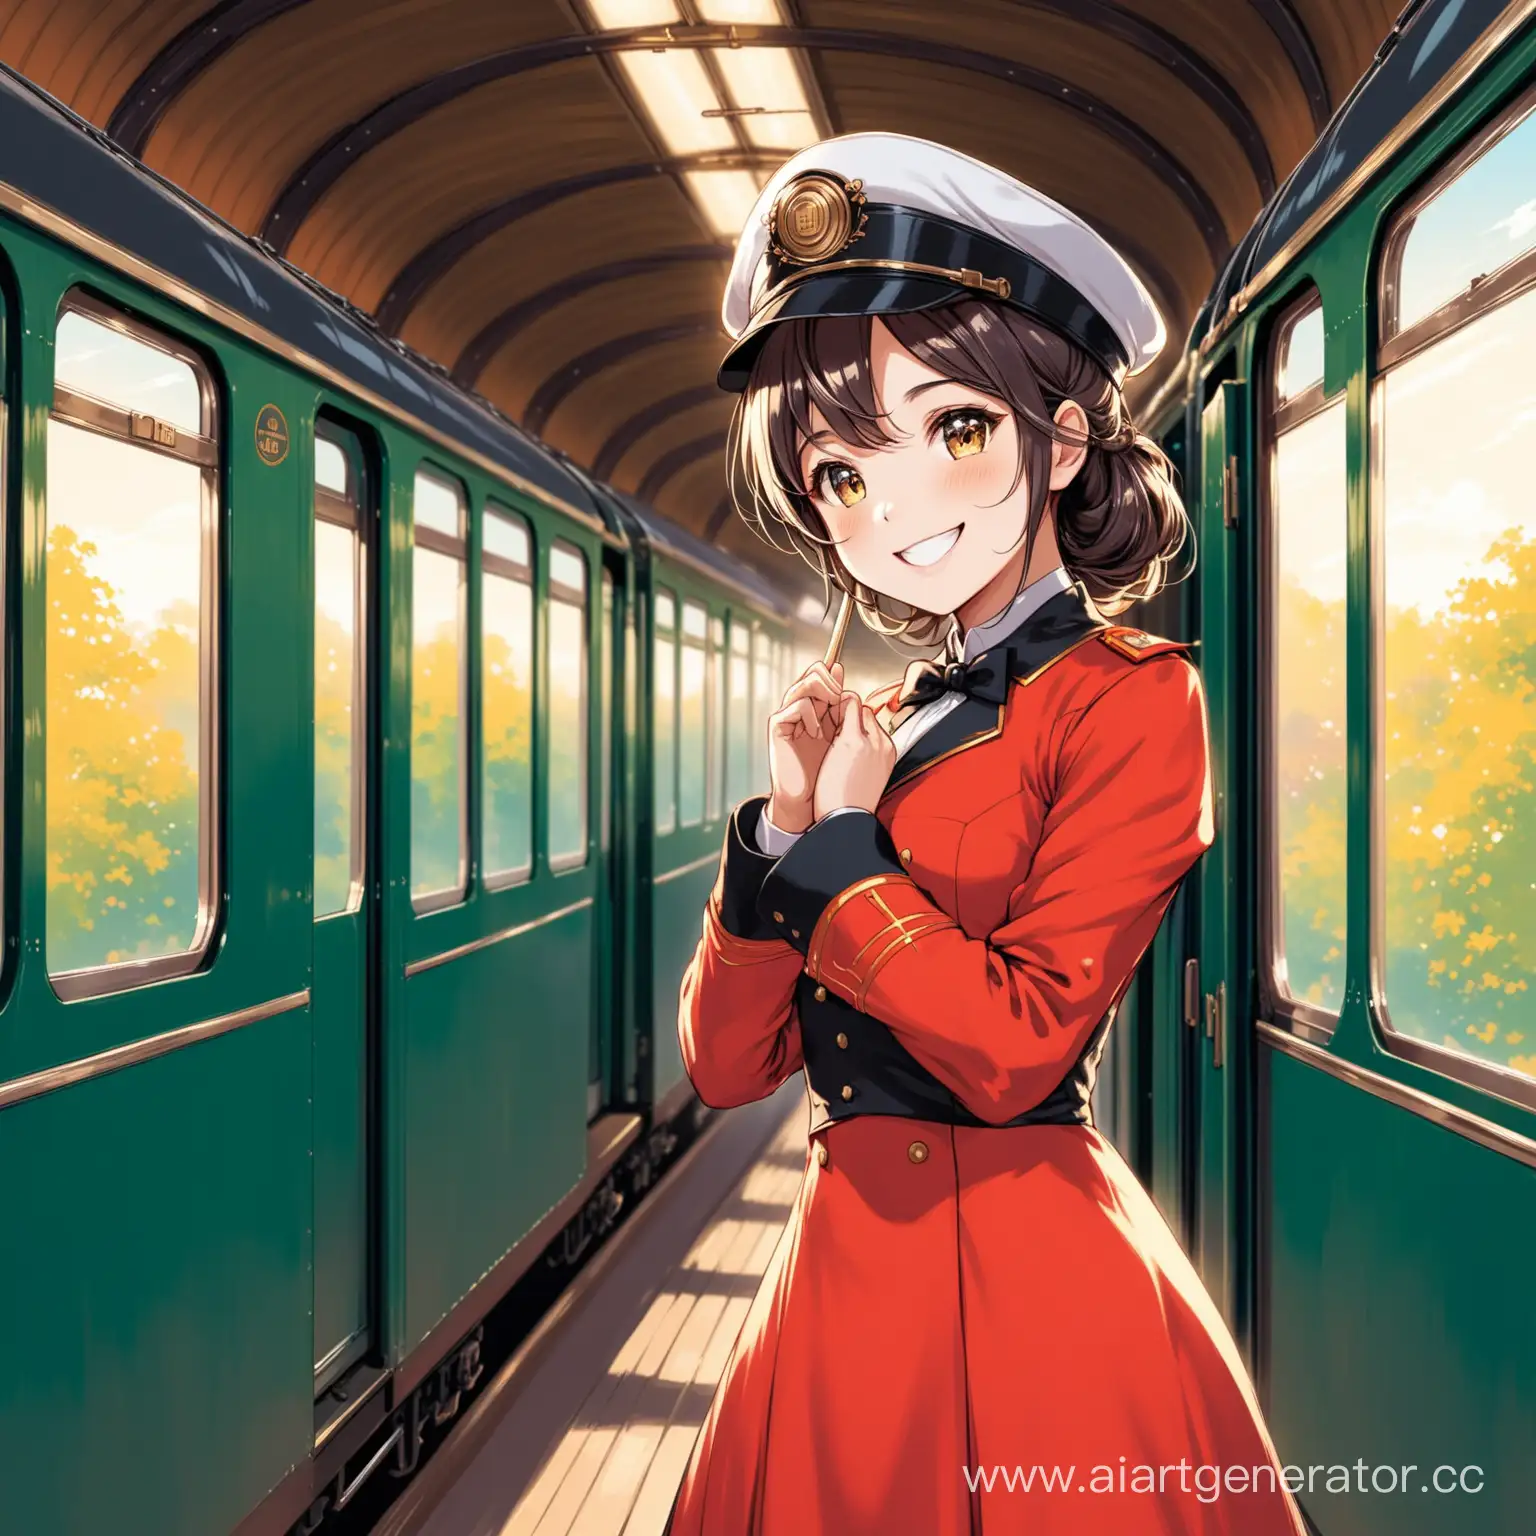 Conductor-Girl-Smiling-Next-to-Train-Carriage